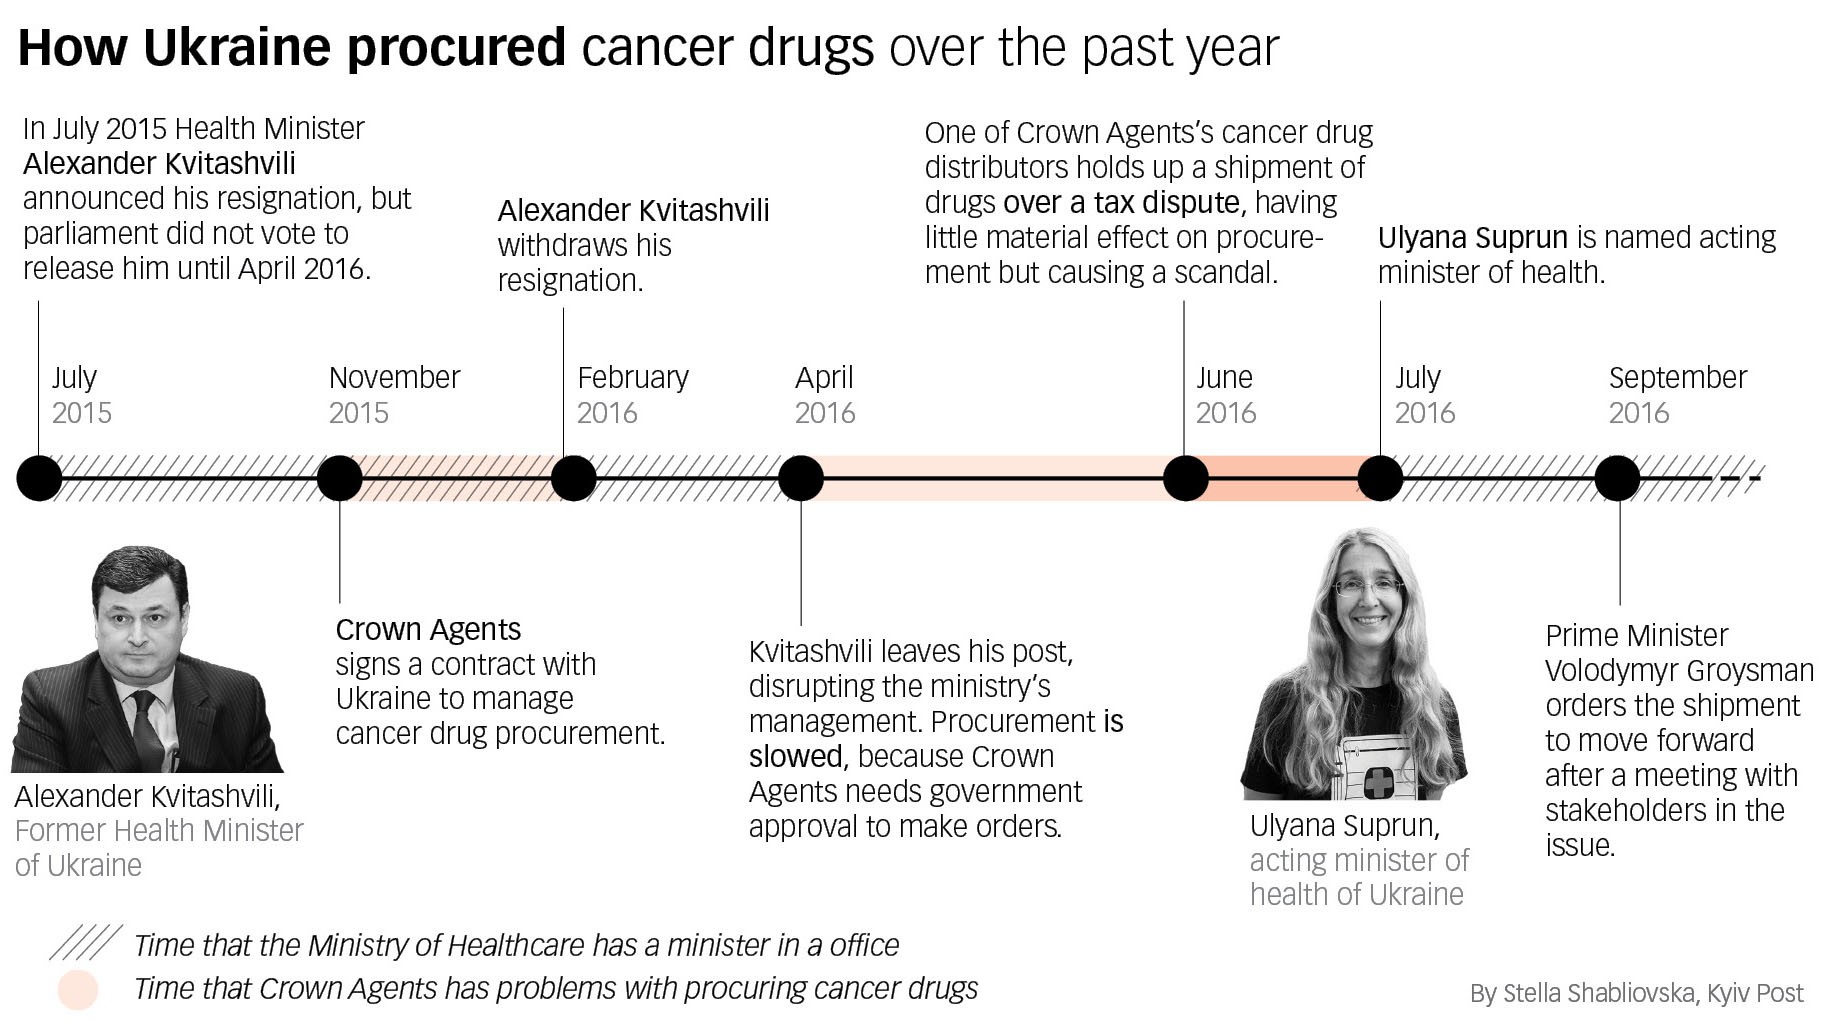 Timeline of a scandal: Crown Agents, a UK quasi-governmental aid organization, was embroiled in a row over the procurement of cancer drugs for Ukraine over the summer after a sub-contractor refused to pay taxes on imported drugs. It took the intervention of Prime Minister Volodymyr Groysman to resolve the problem.